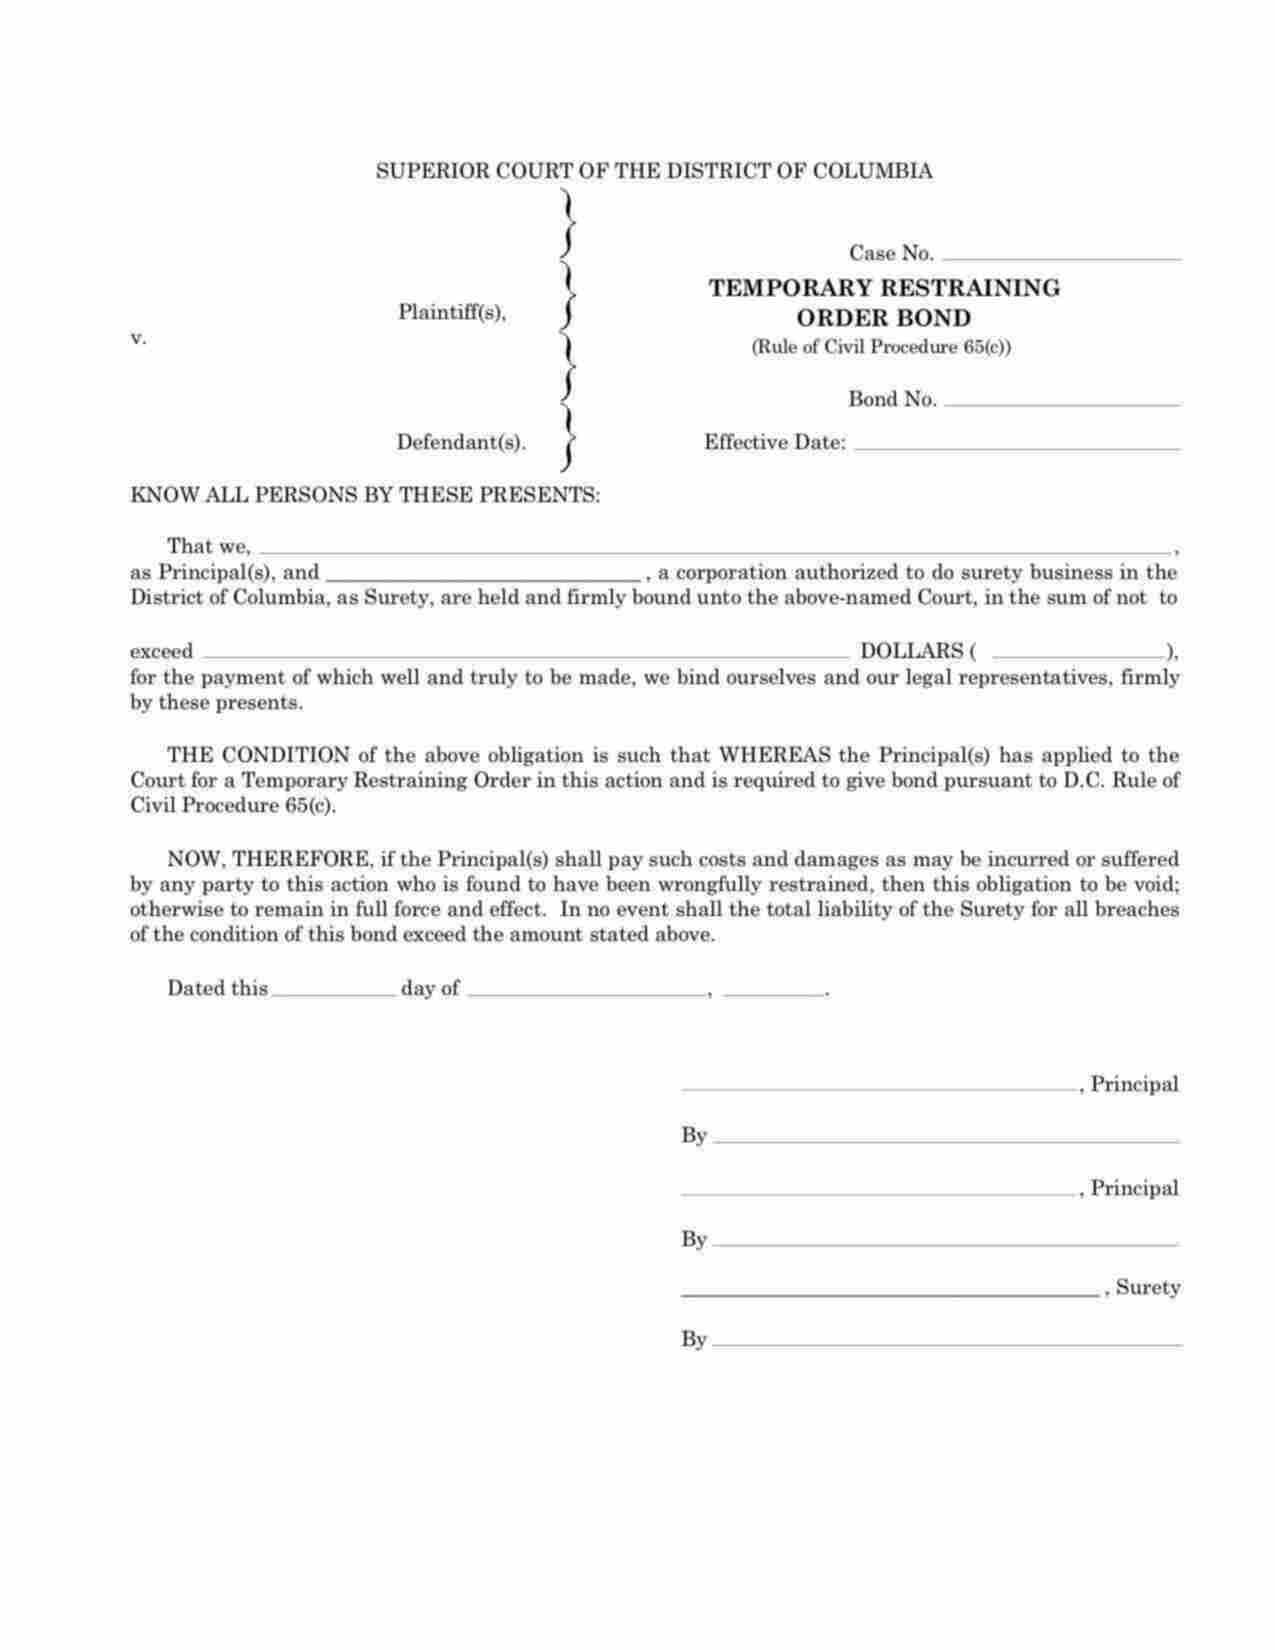 District of Columbia Temporary Restraining Order Bond Form